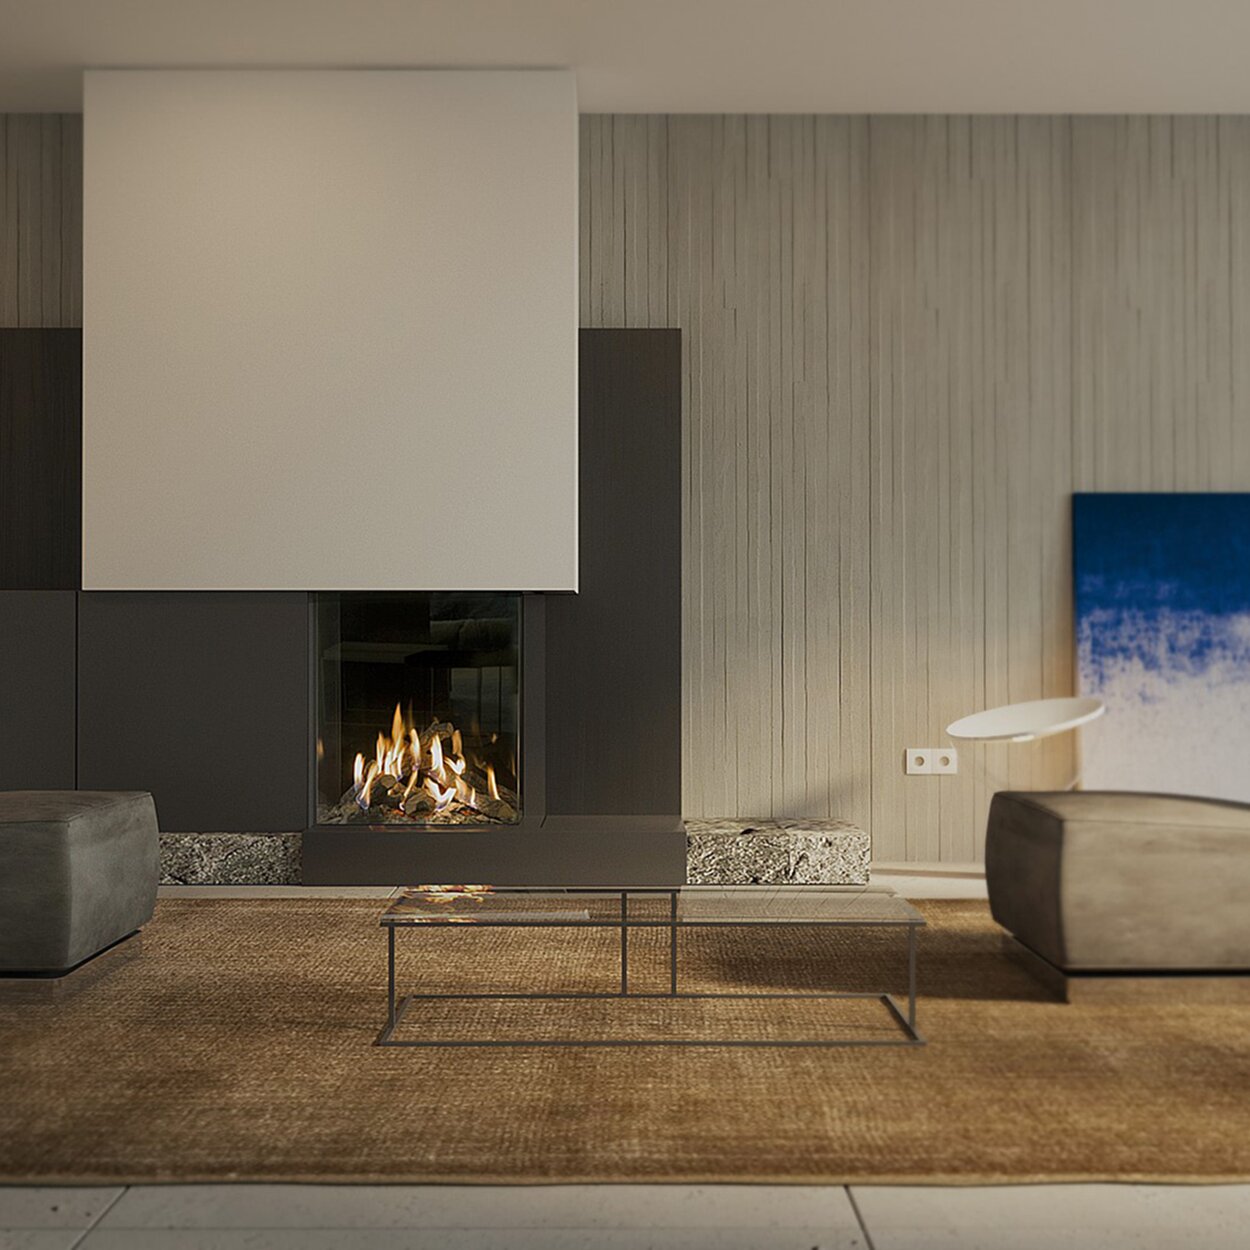 Gas fireplace GP65/75C corner version with dark back wall and white panelling in a minimalist living room